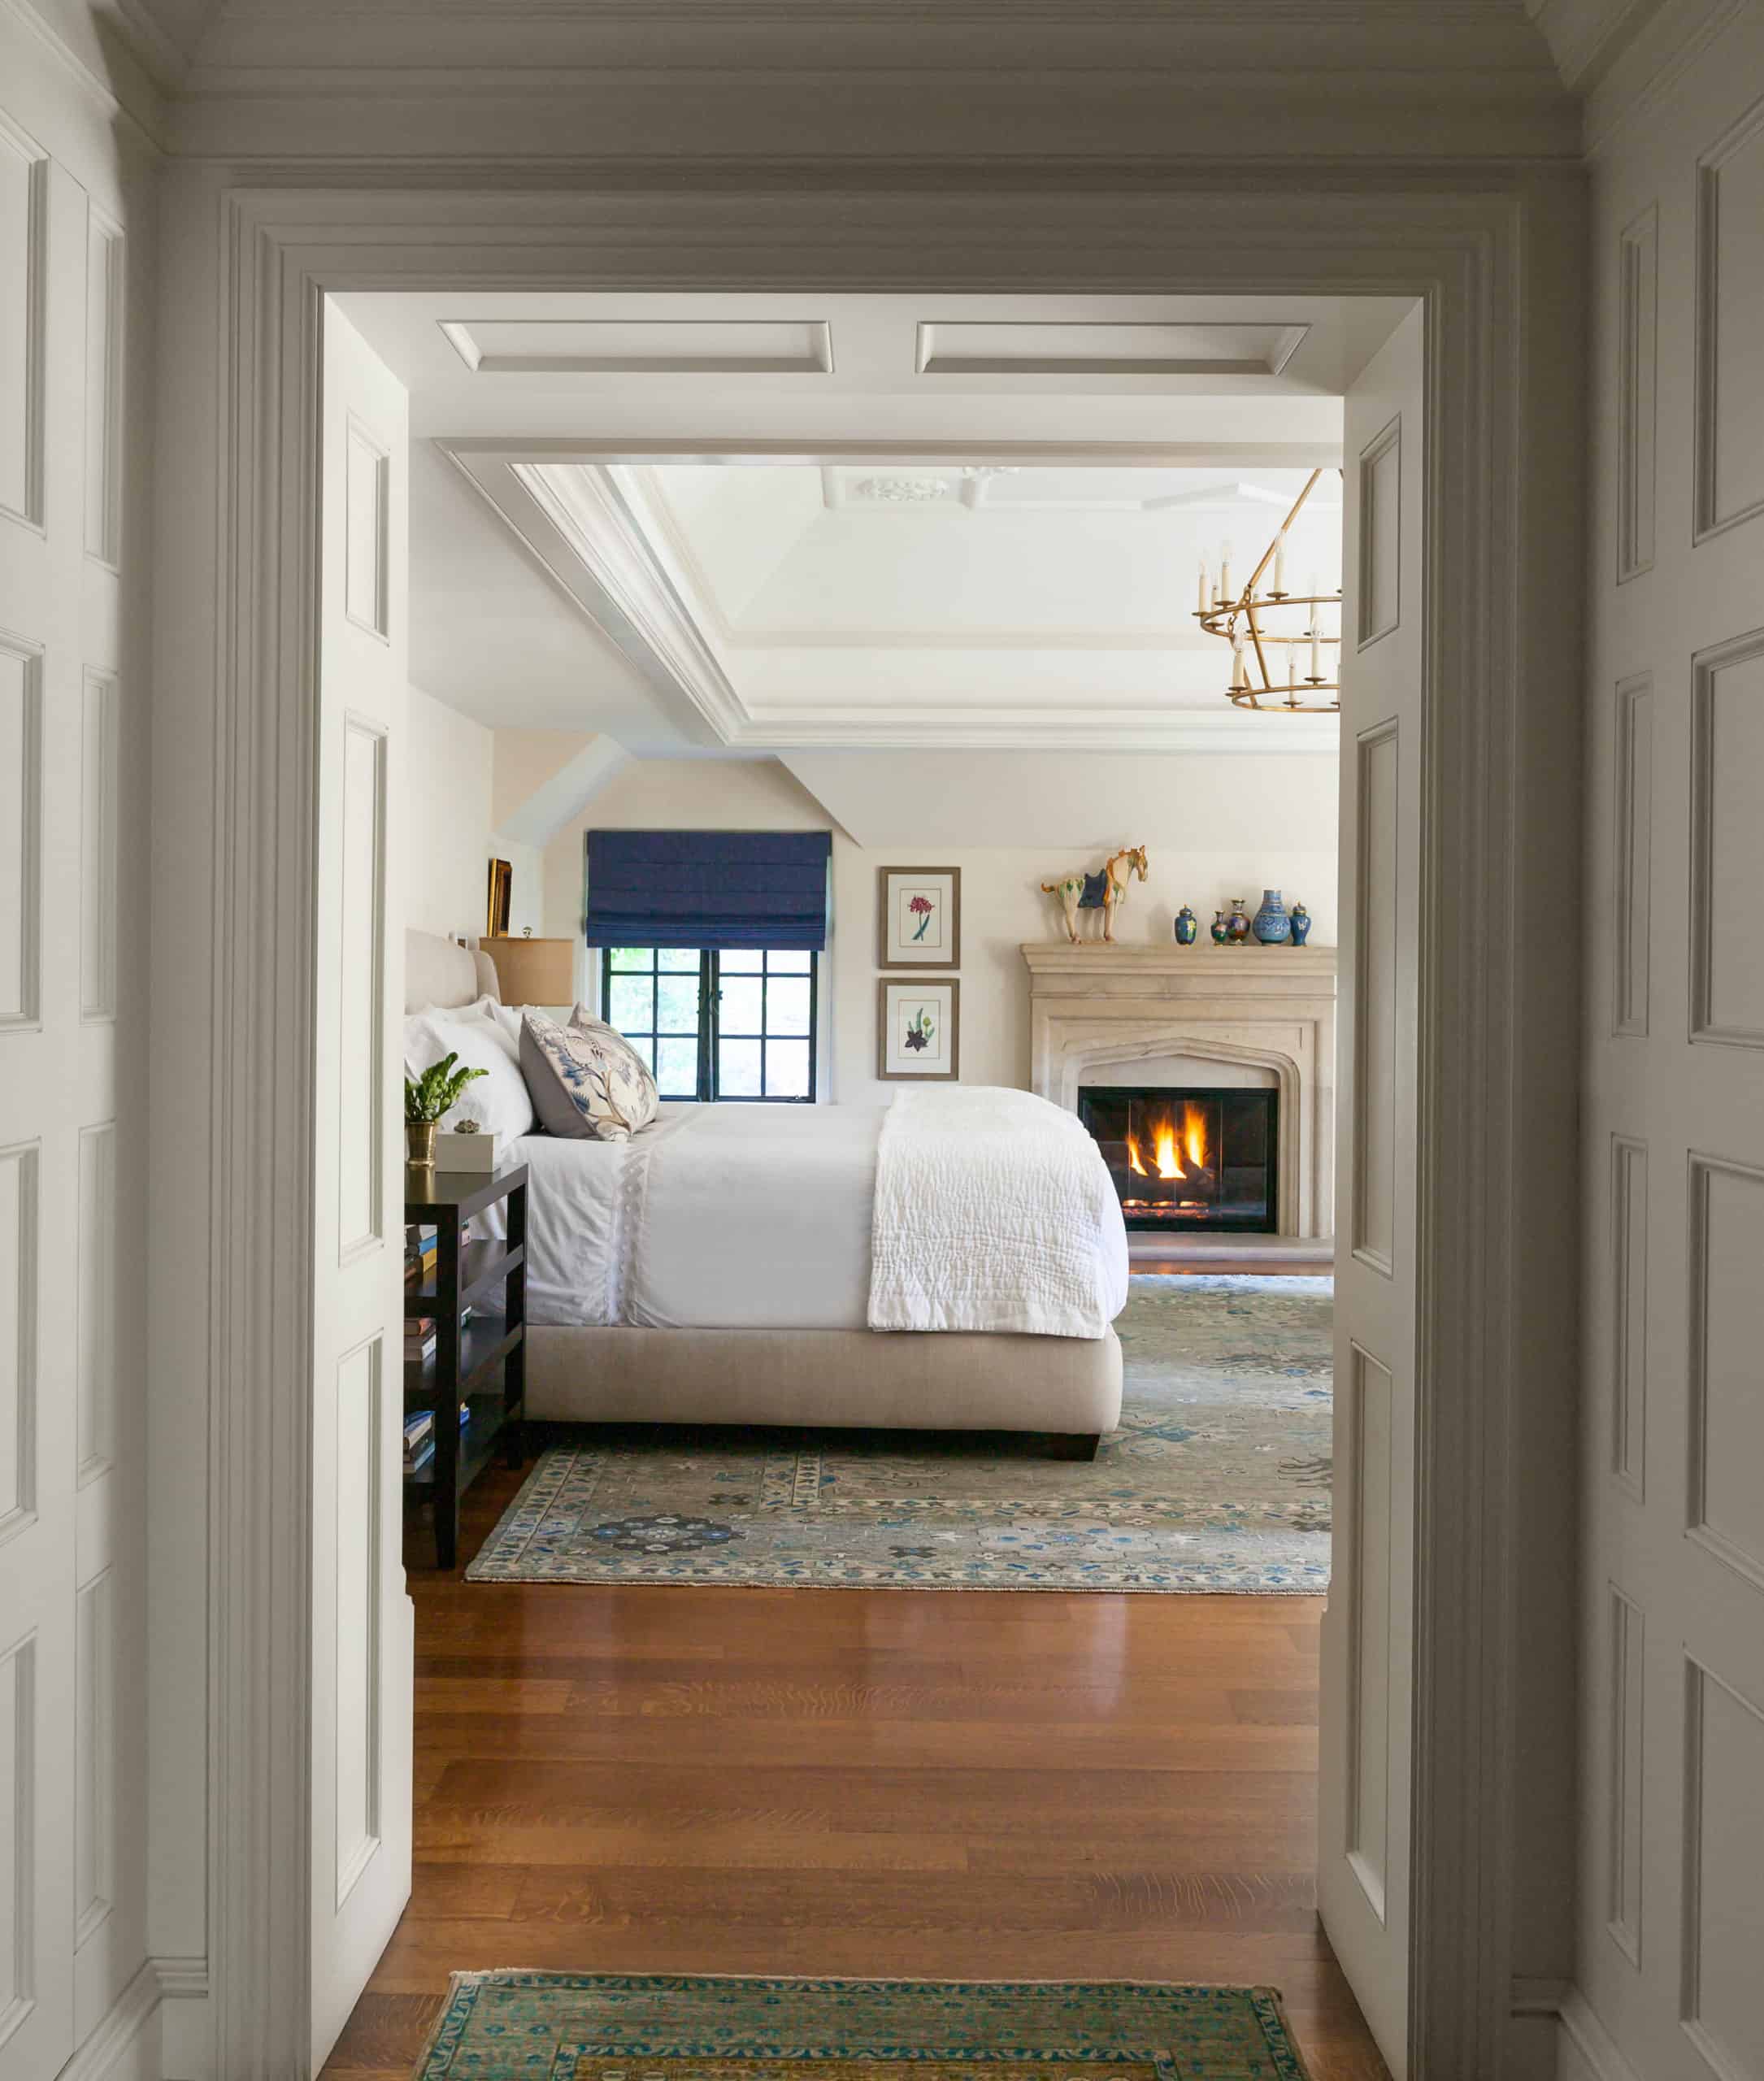 Creating an enticing master bedroom entrance